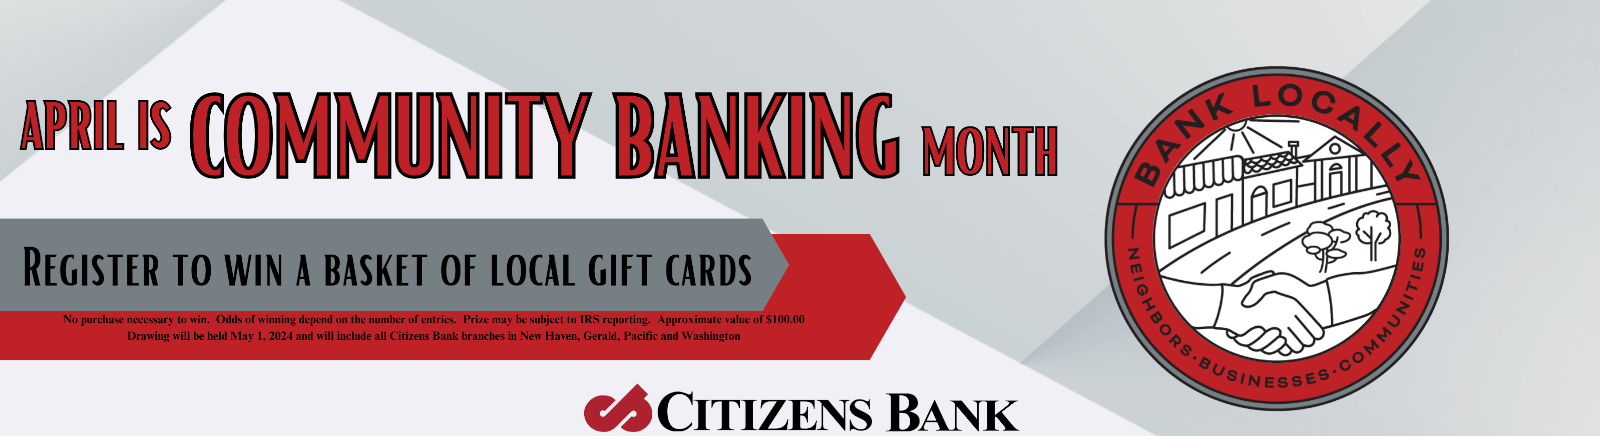 April is Community Banking Month Register to win a basket of local gift cards No purchase necessary to win. Odds of winning depend on the number of entries. Prize may be subject to IRS reporting. Approximate value of $100.00. Drawing will be held on May 1st, 2024 and will include al of Citizens Bank branches in New Haven, Gerald, Pacific, Washington. Bank Locally - Neighbors - Businesses - Communities